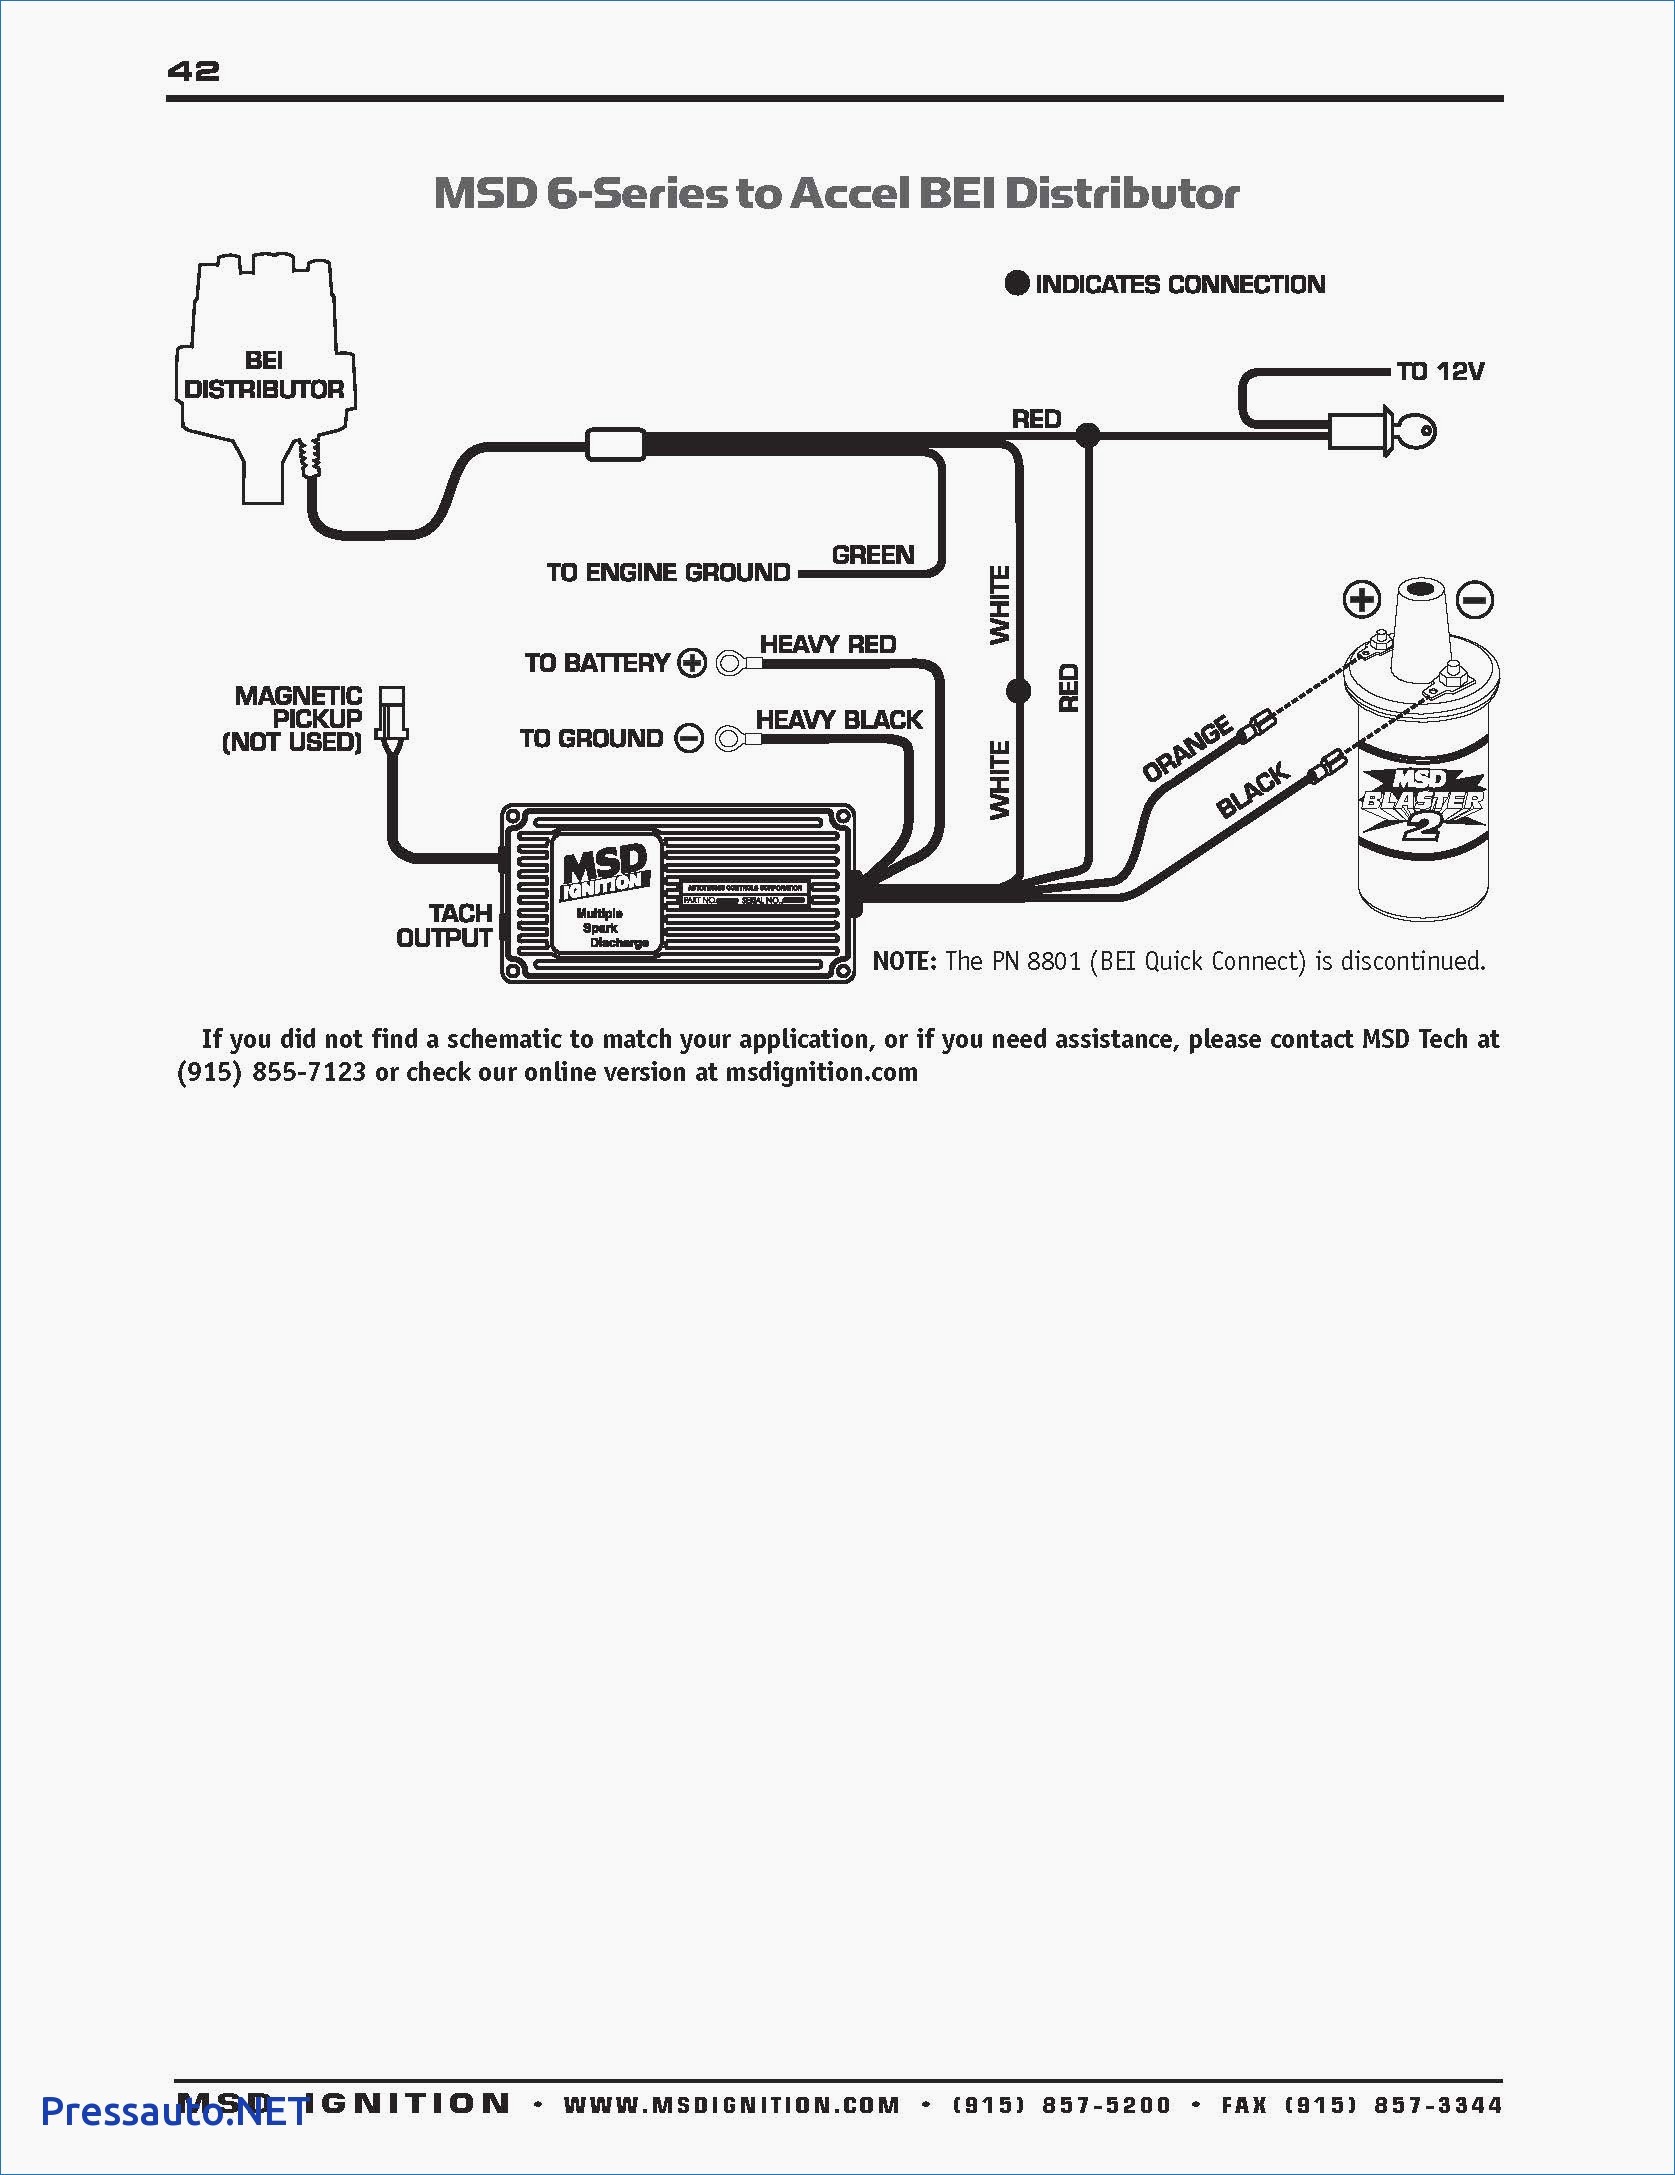 Unusual Accel Distributor Wiring Diagram Ideas The Best Electrical Ripping Hei